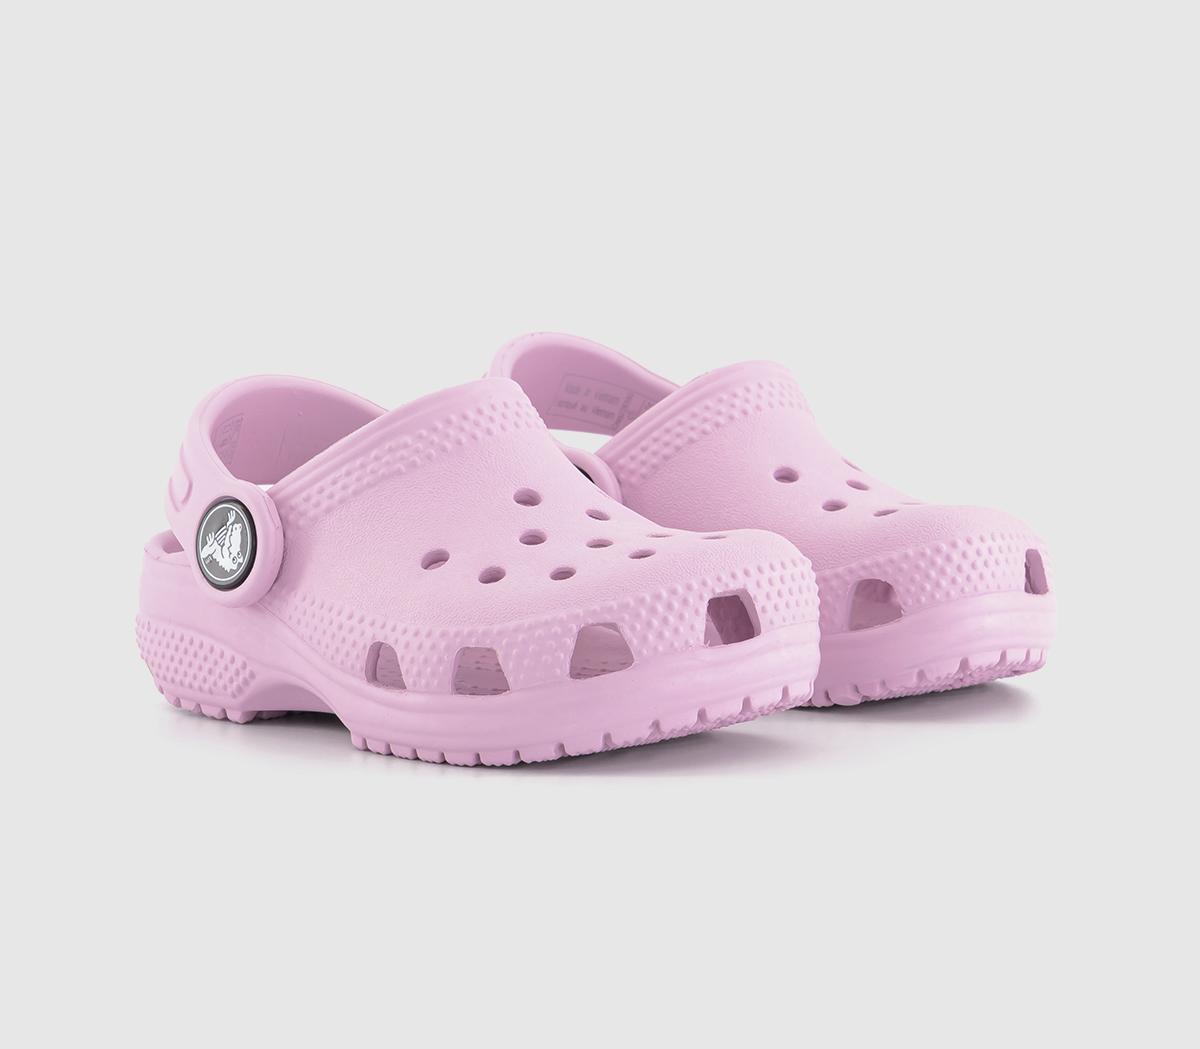 Crocs Classic Kids Clogs Ballerina Pink Synthetic, 7 Infant